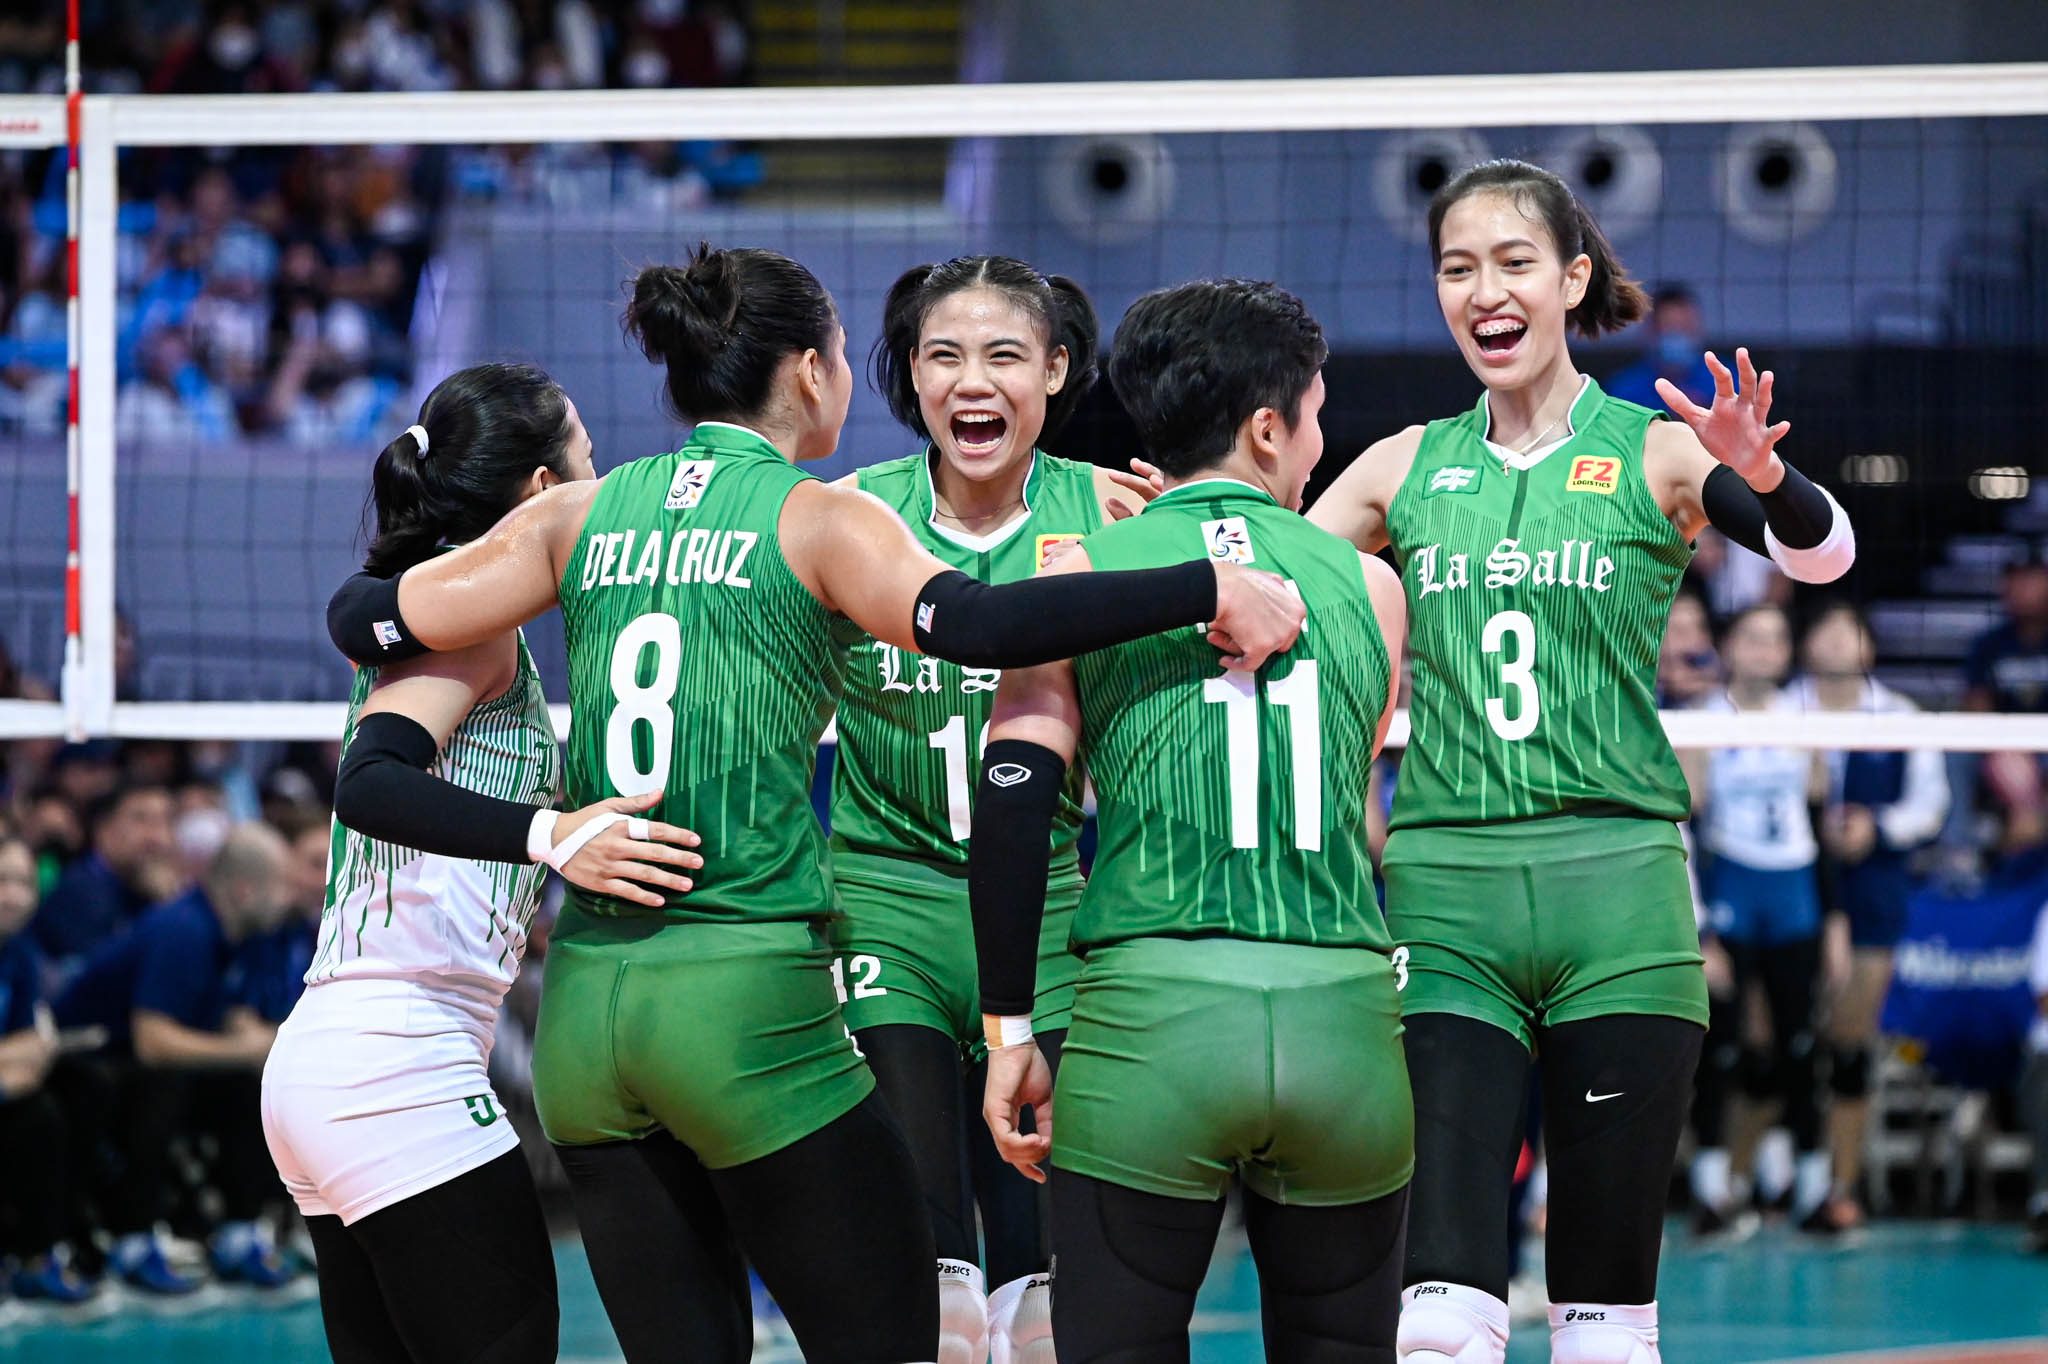 La Salle humiliates NU with shocking rout to sweep UAAP 1st round